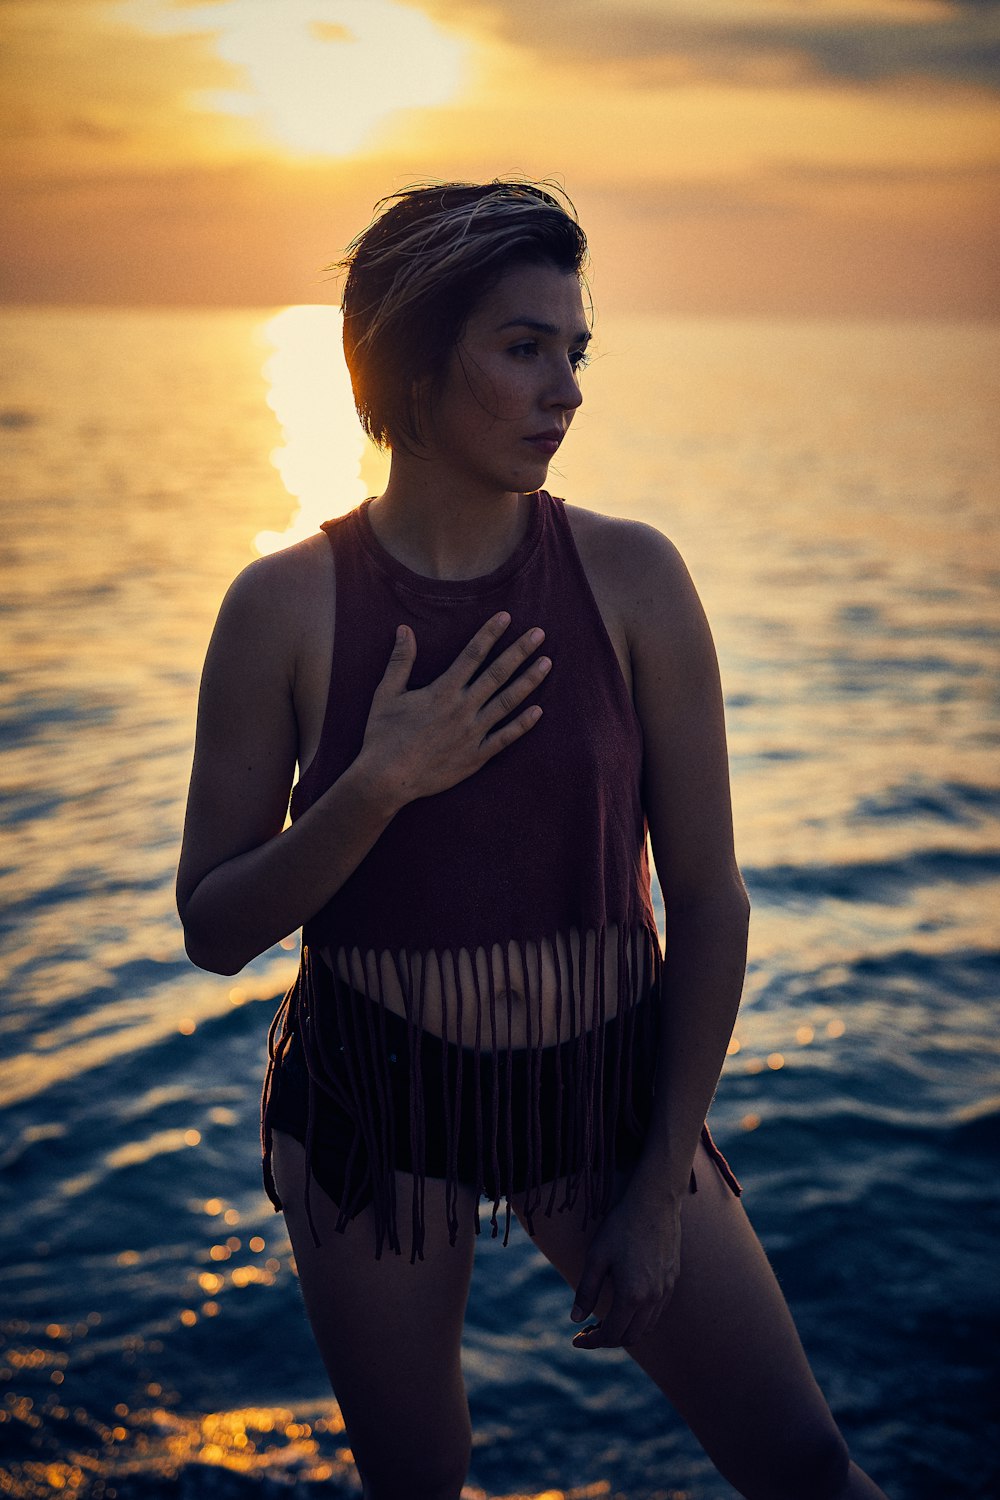 woman in black and white stripe tank top standing on seashore during sunset